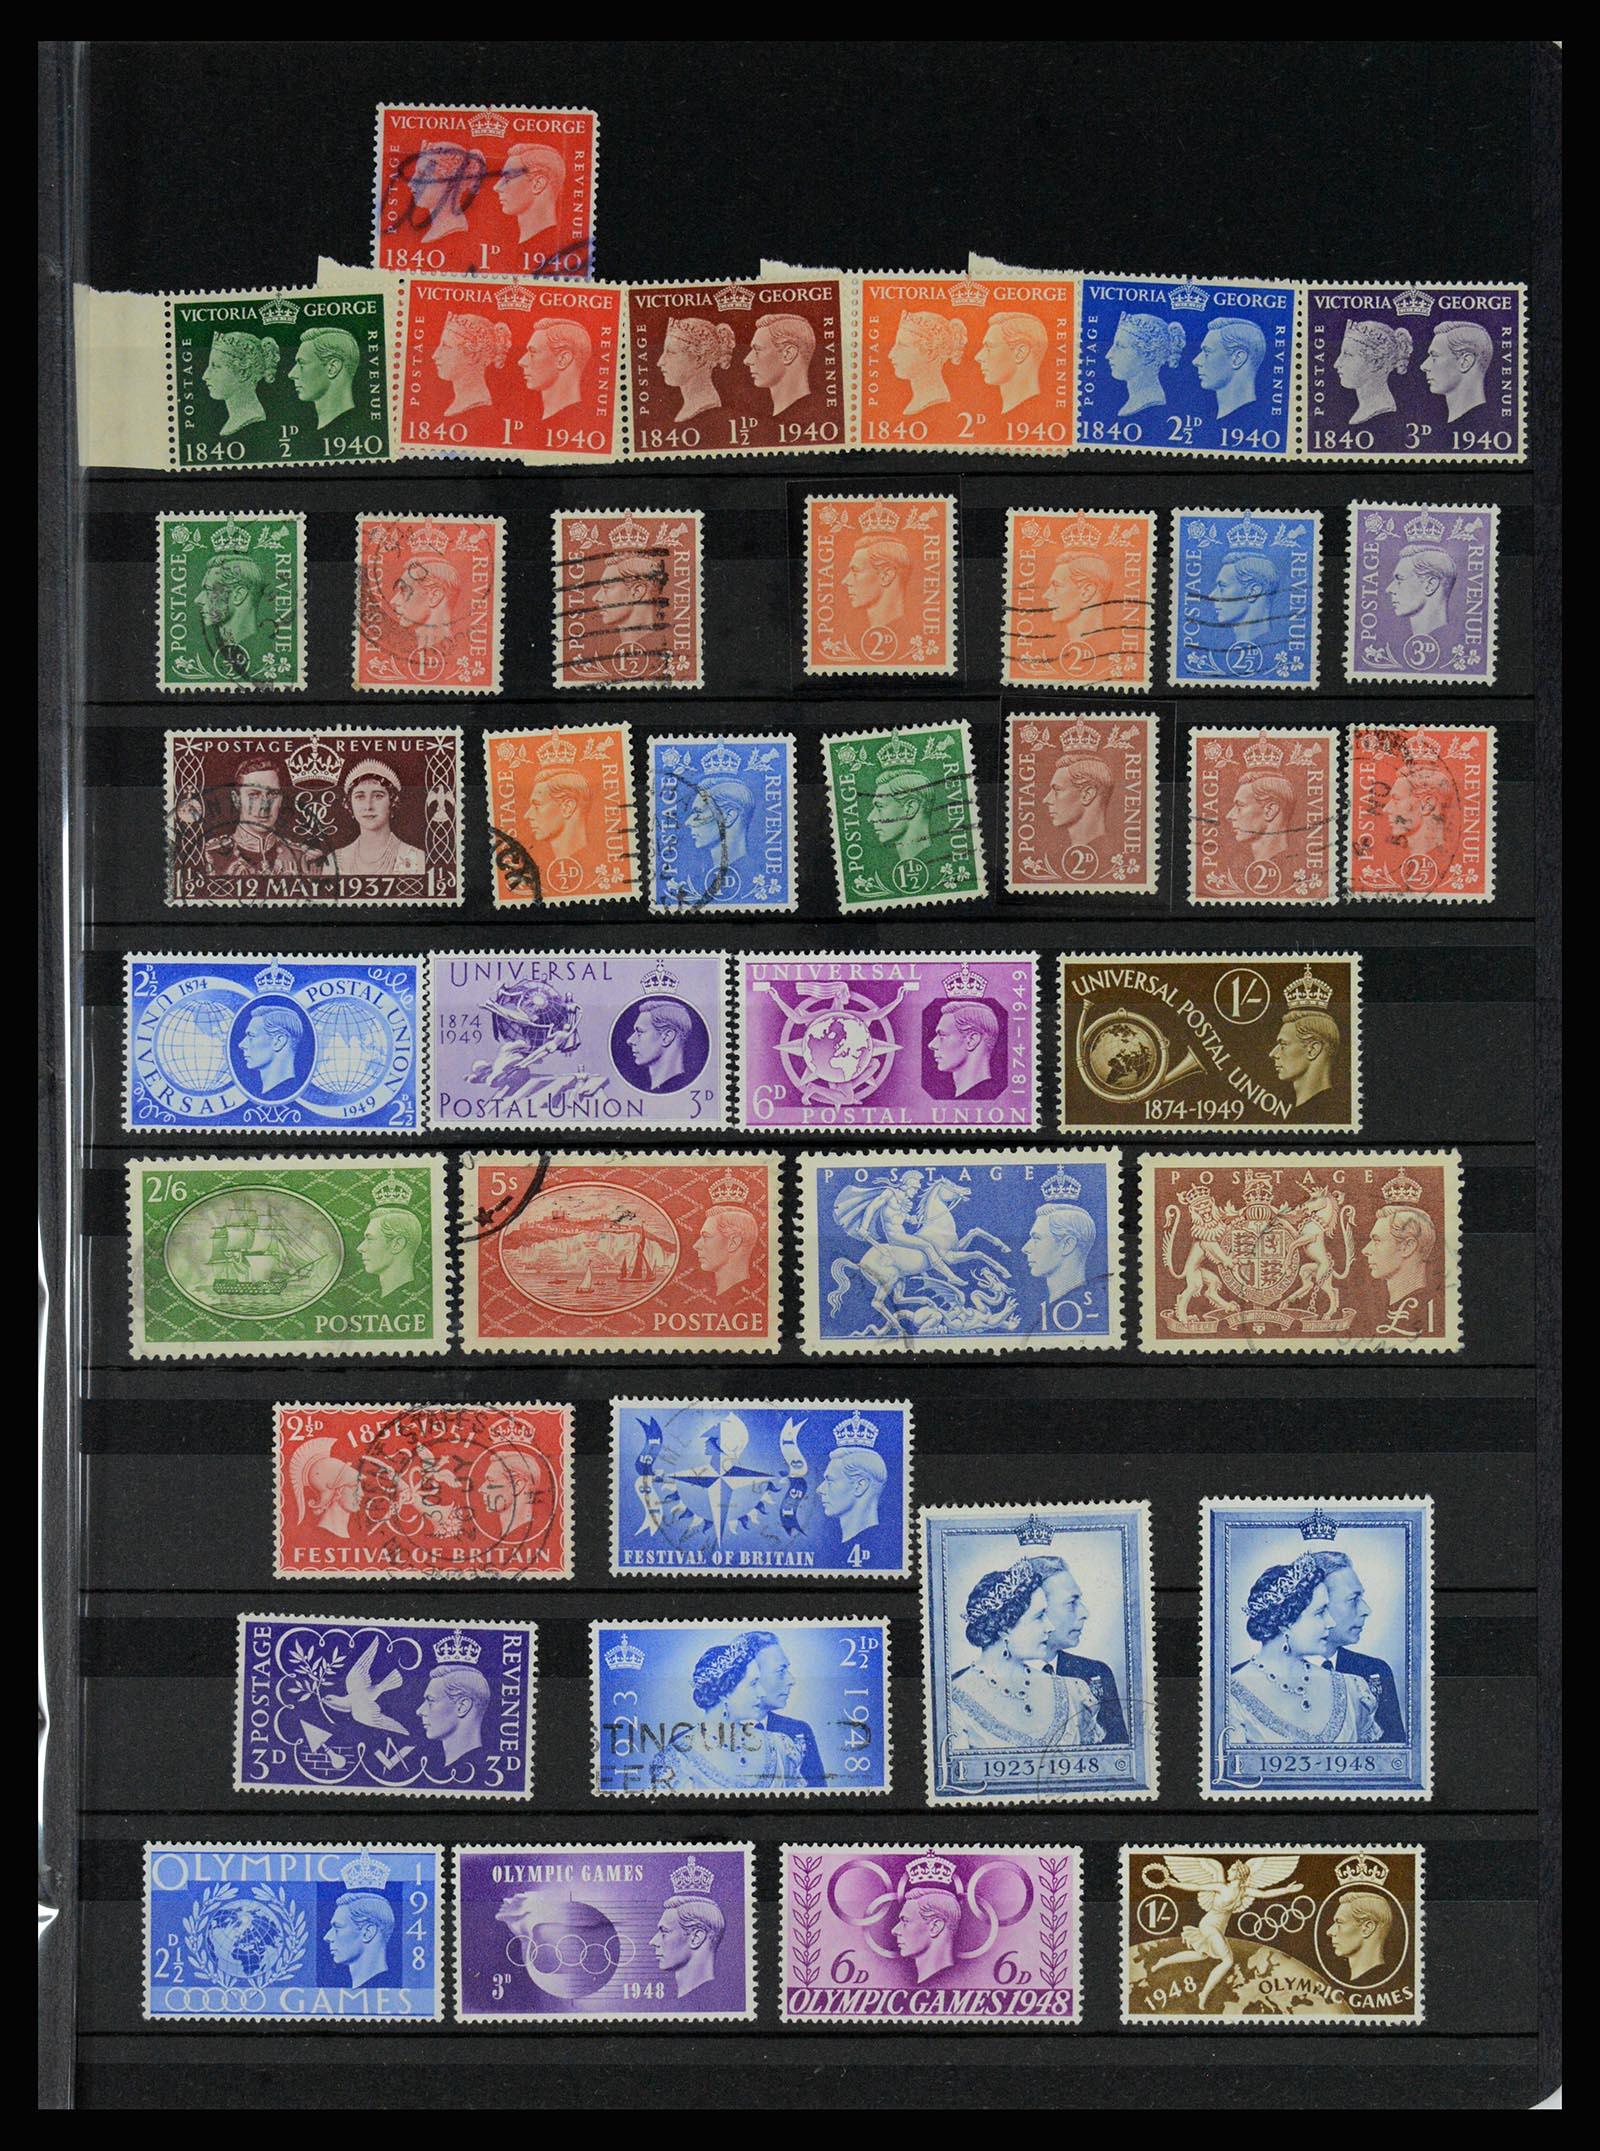 37185 023 - Stamp collection 37185 Great Britain 1840-1953.